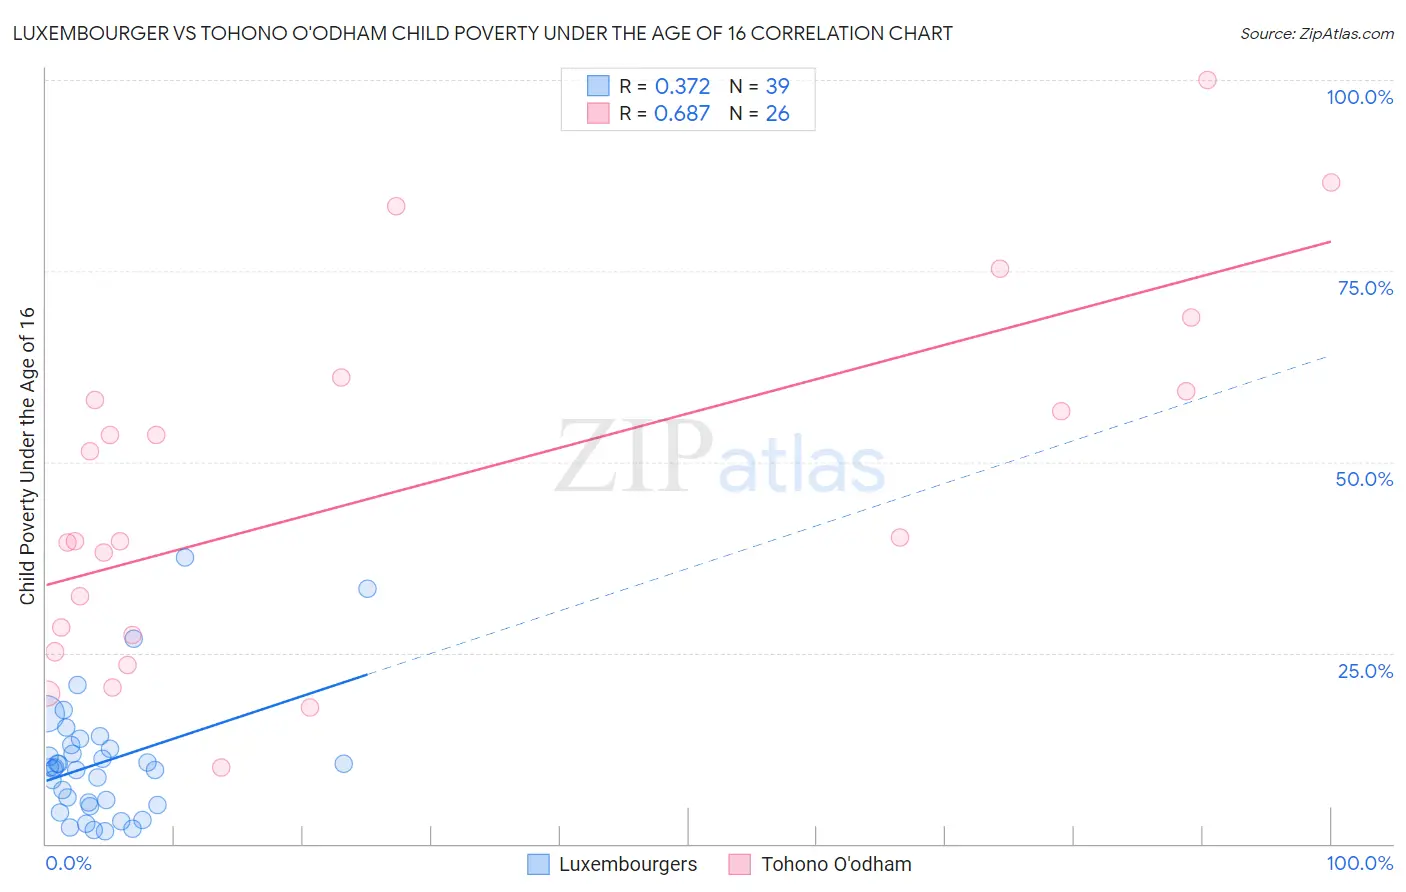 Luxembourger vs Tohono O'odham Child Poverty Under the Age of 16